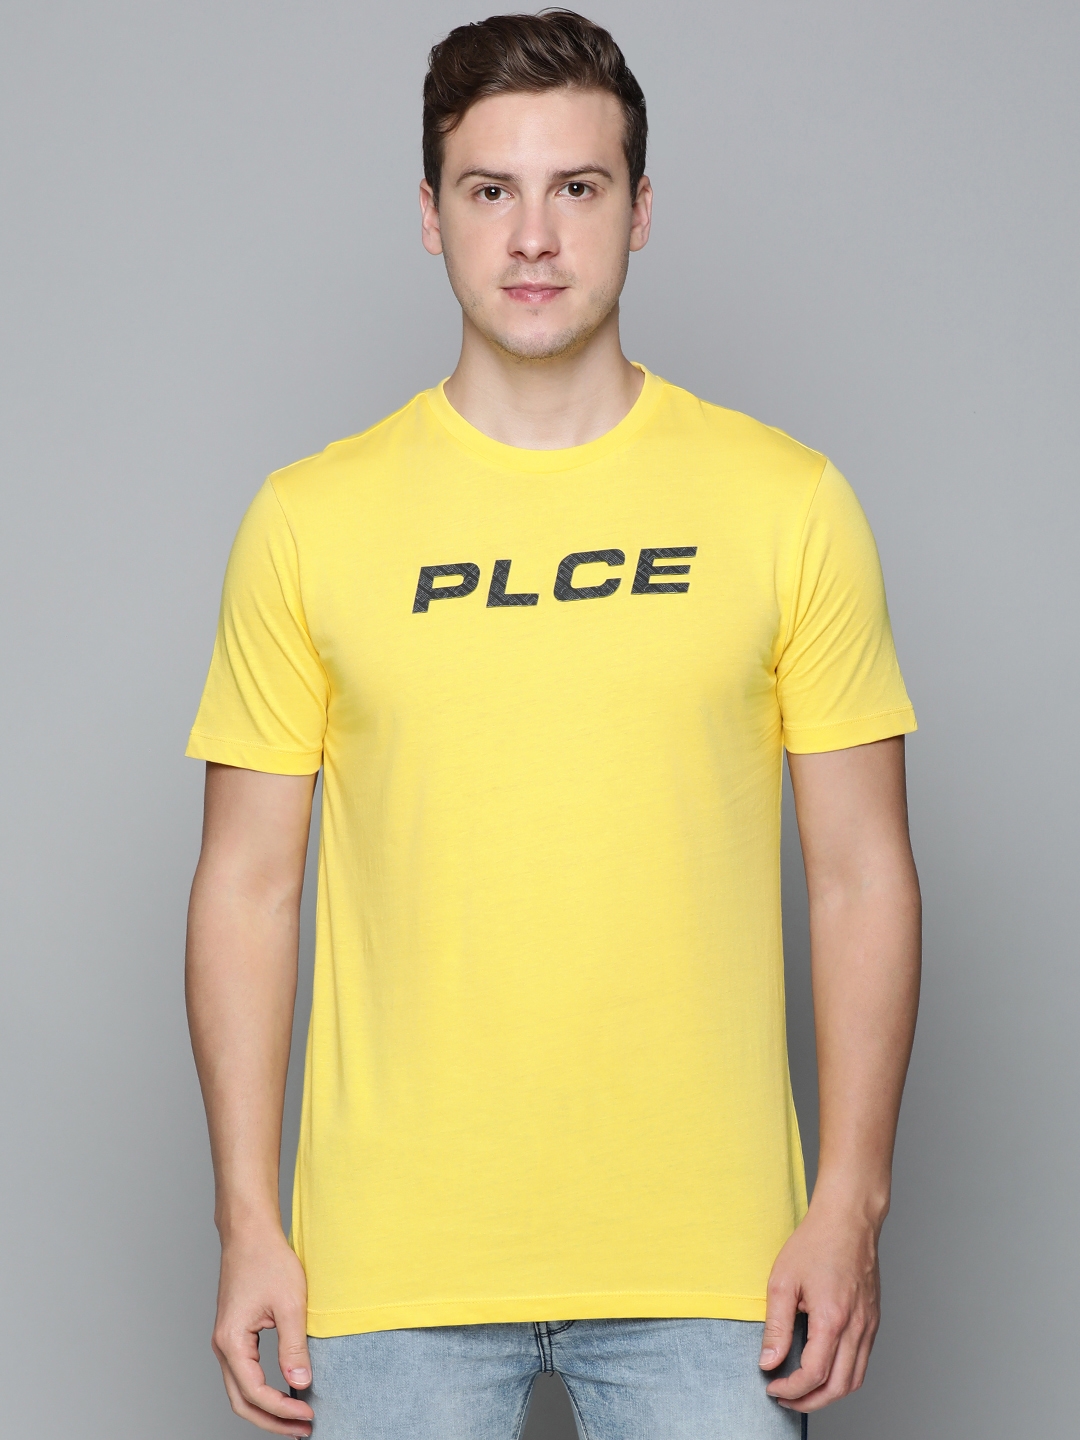 883 Police | 883 Police Mens Yellow Round Neck T-shirt 